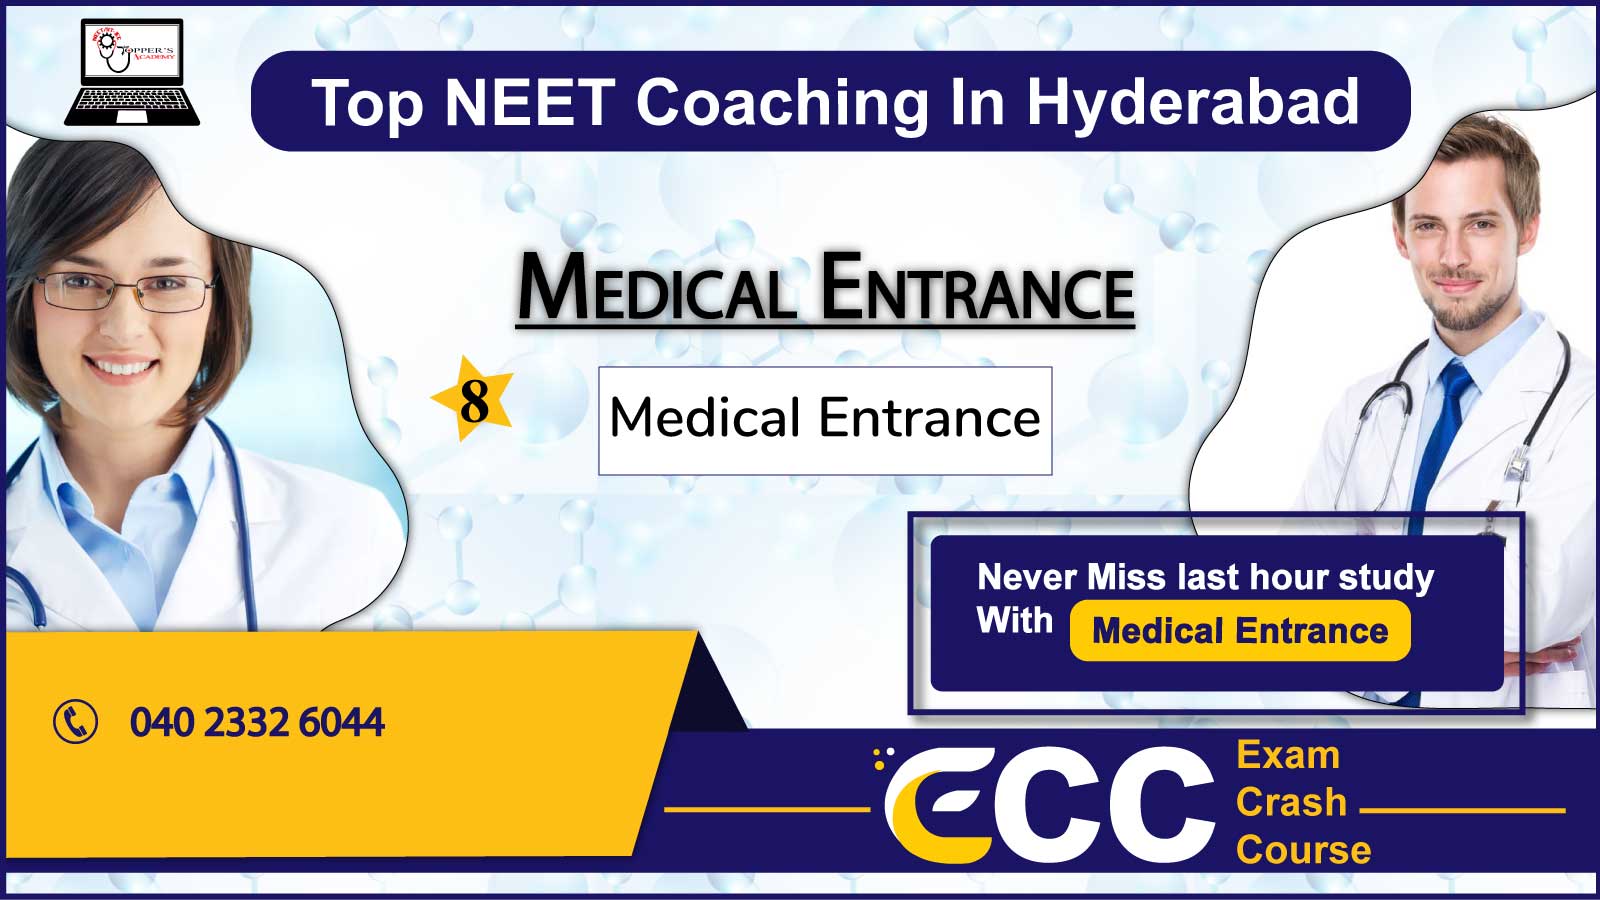 Medical Entrance Coaching in Hyderabad